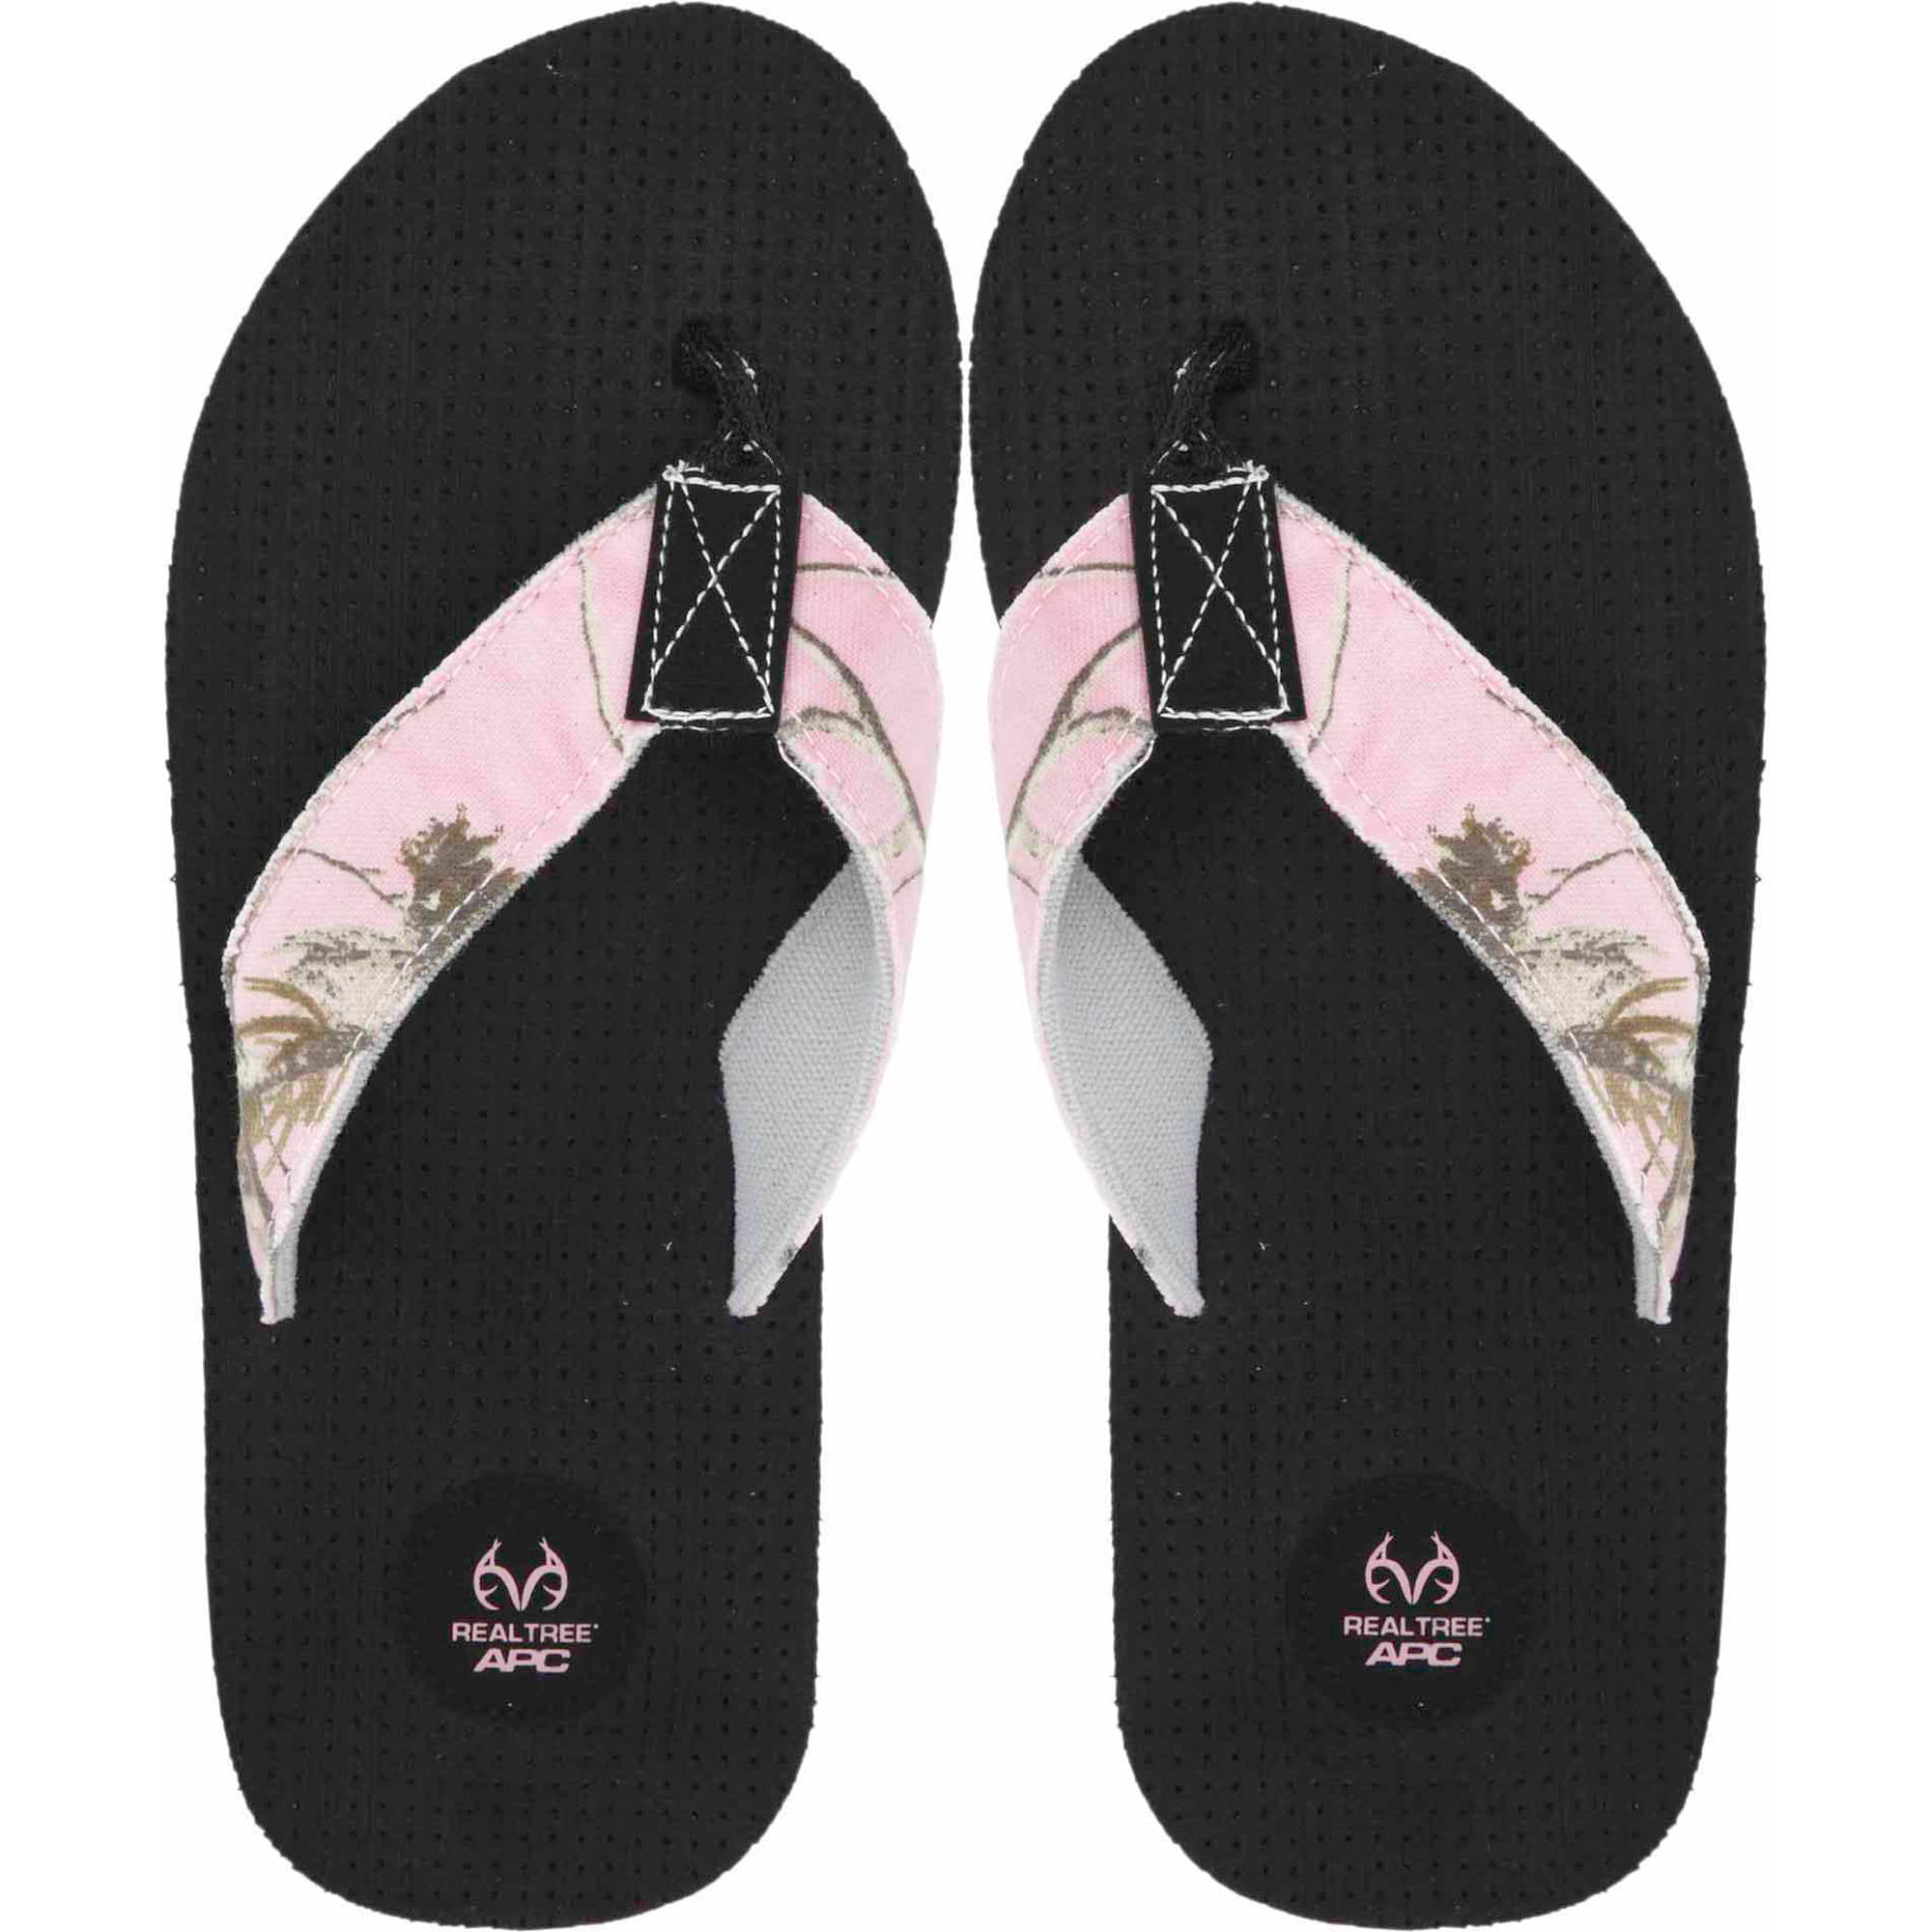 NEW Girl Youth Large *2-3* XL *4-5* REALTREE Pink Camo Flip Flops Sandals Junior